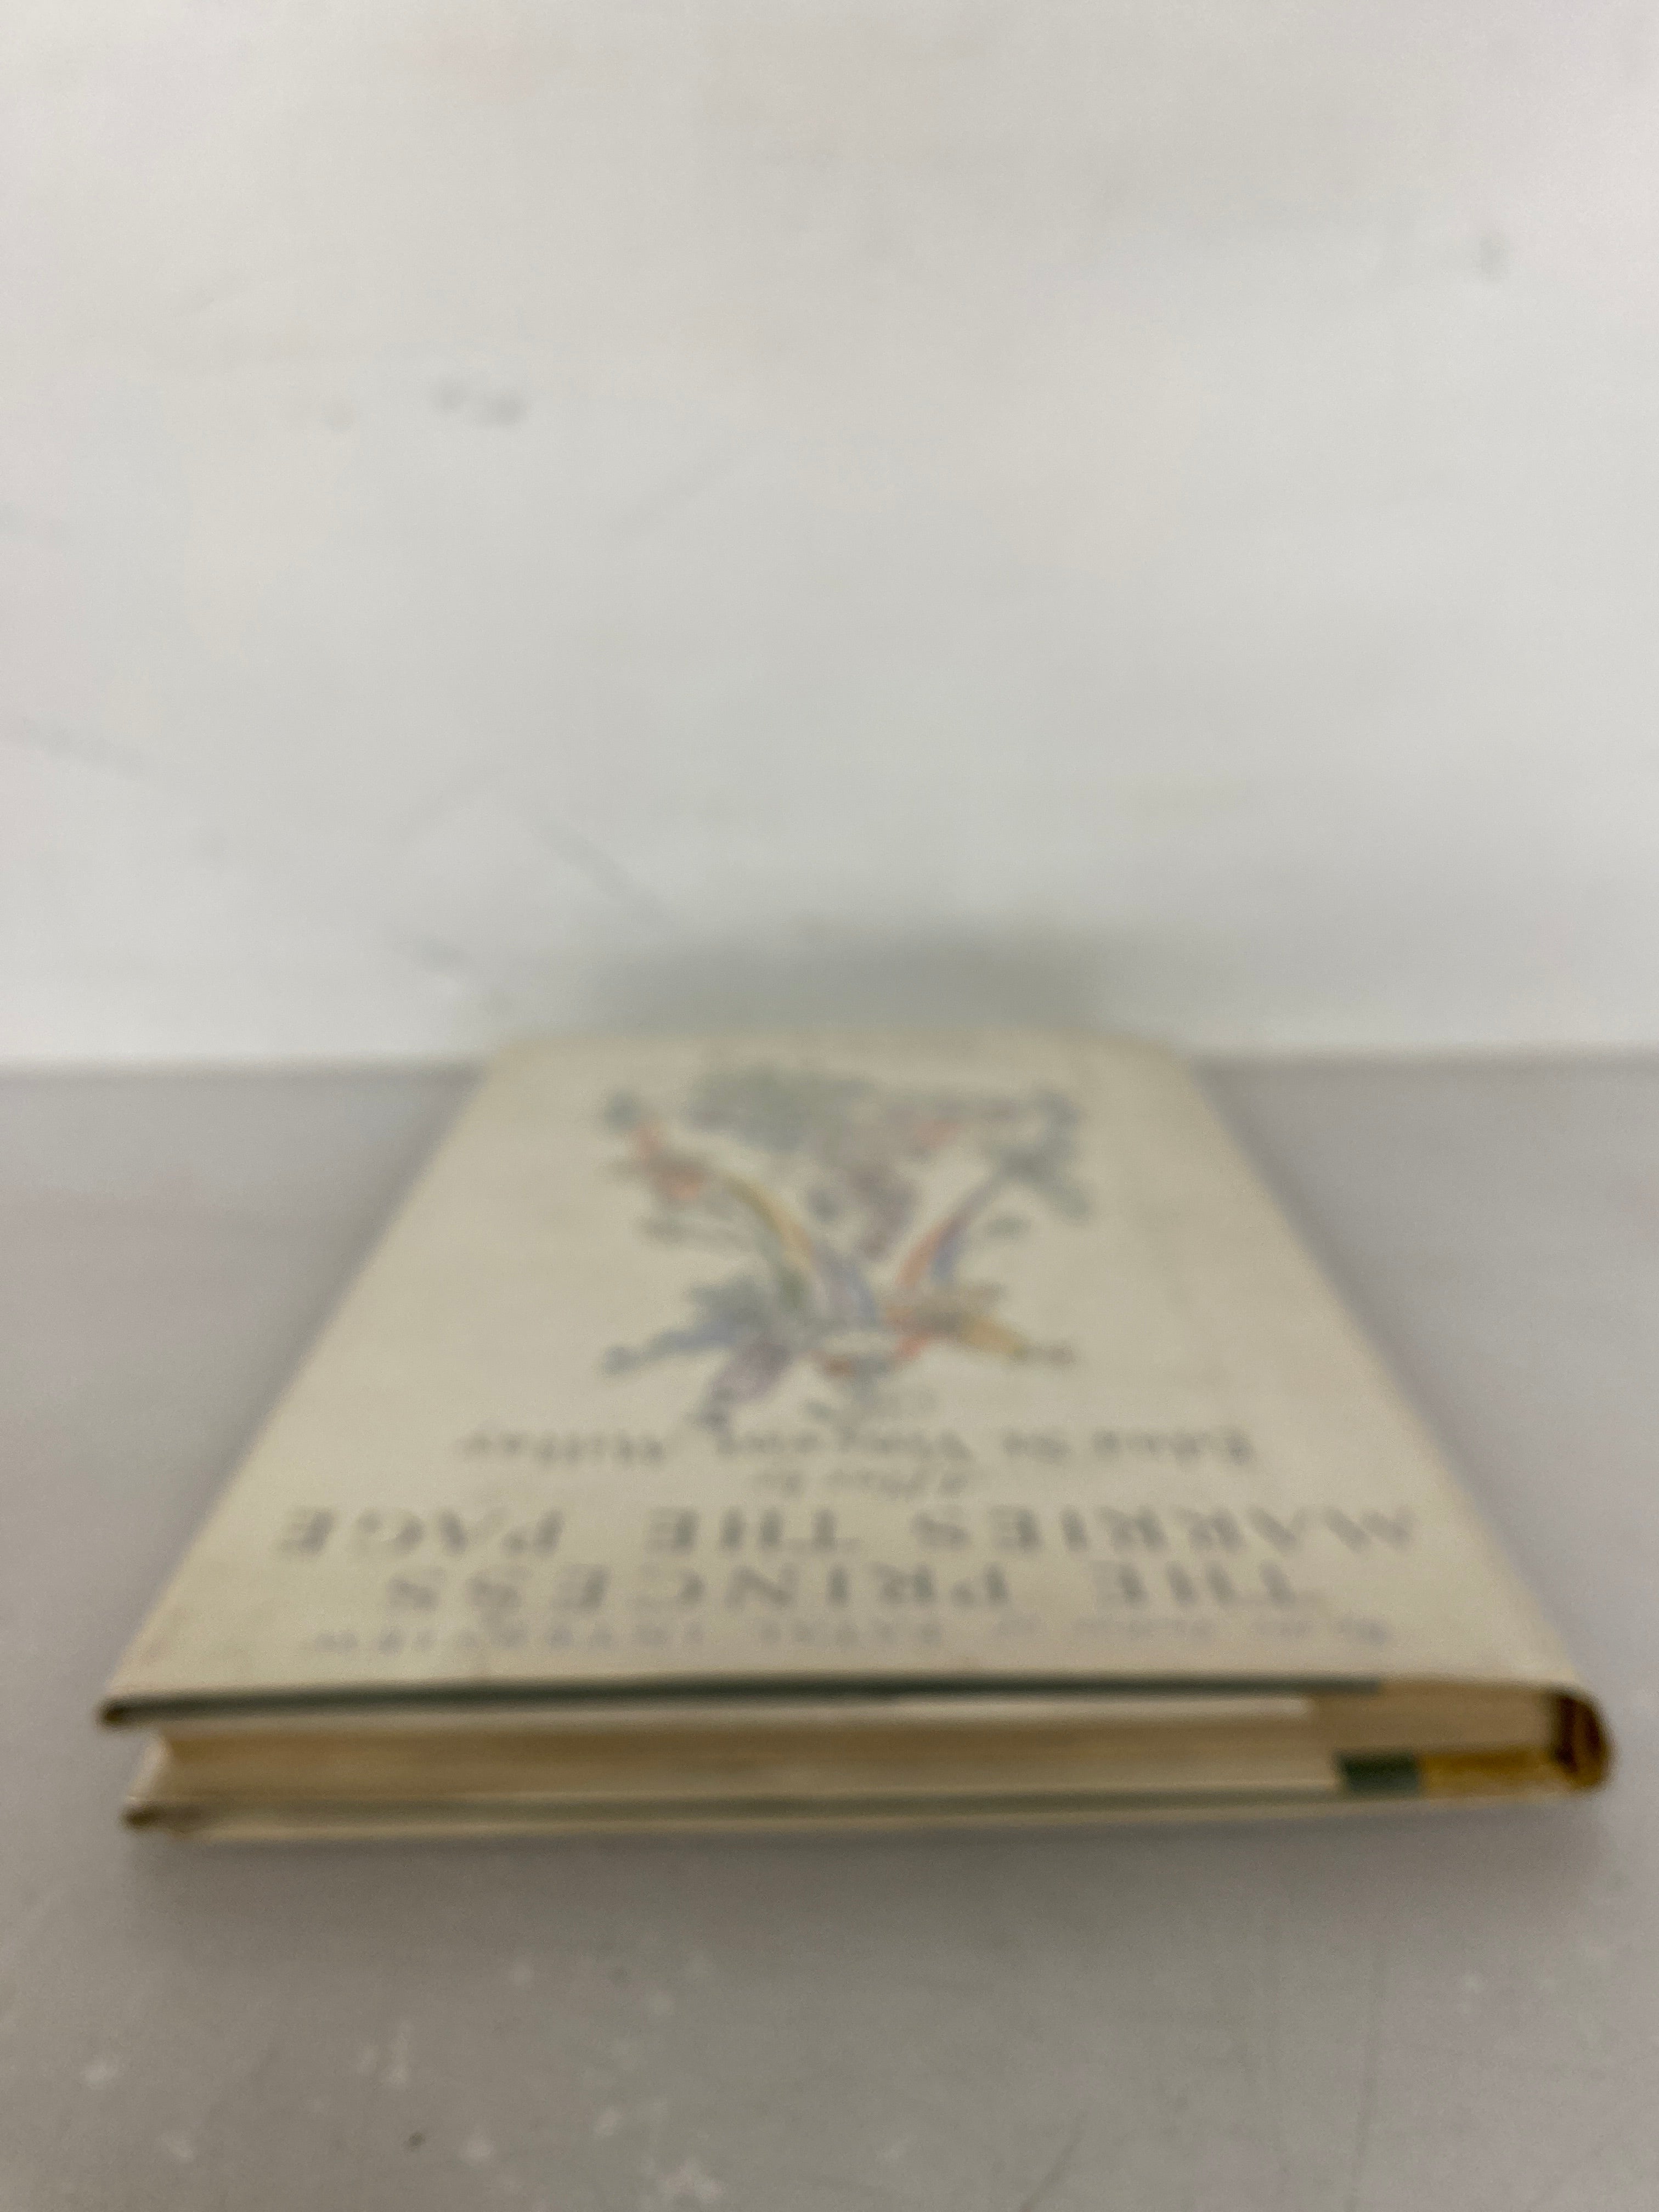 The Princess Marries the Page by Edna St. Vincent Millay First Edition 1932 HC